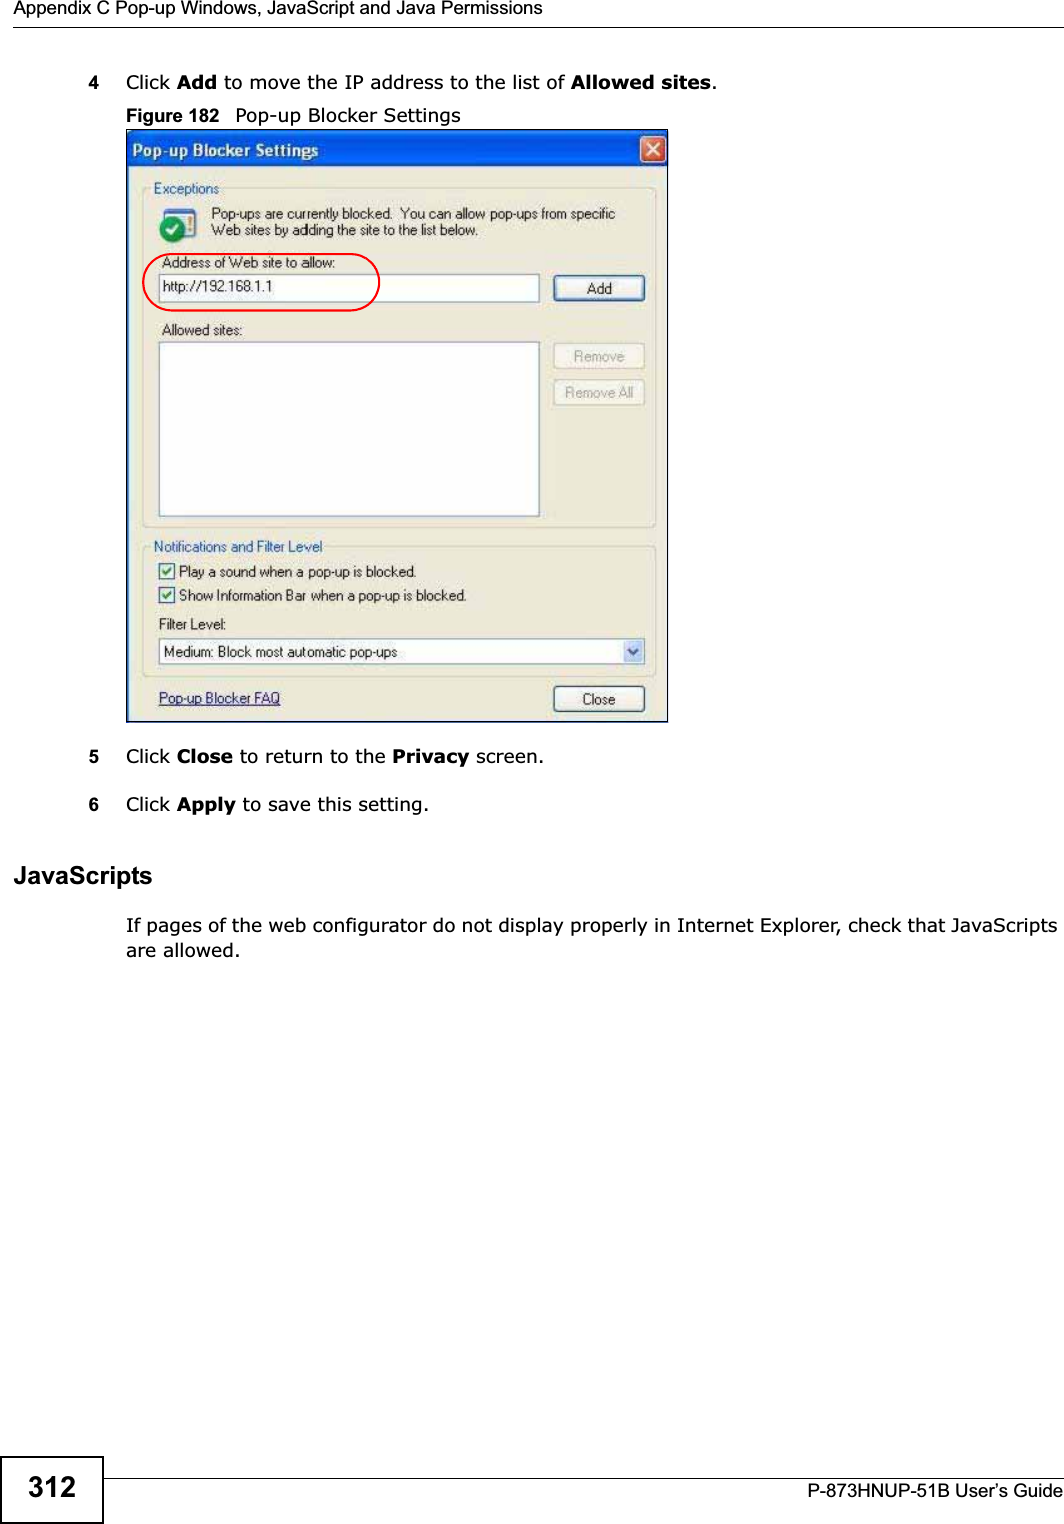 Appendix C Pop-up Windows, JavaScript and Java PermissionsP-873HNUP-51B User’s Guide3124Click Add to move the IP address to the list of Allowed sites.Figure 182   Pop-up Blocker Settings5Click Close to return to the Privacy screen. 6Click Apply to save this setting. JavaScriptsIf pages of the web configurator do not display properly in Internet Explorer, check that JavaScripts are allowed. 